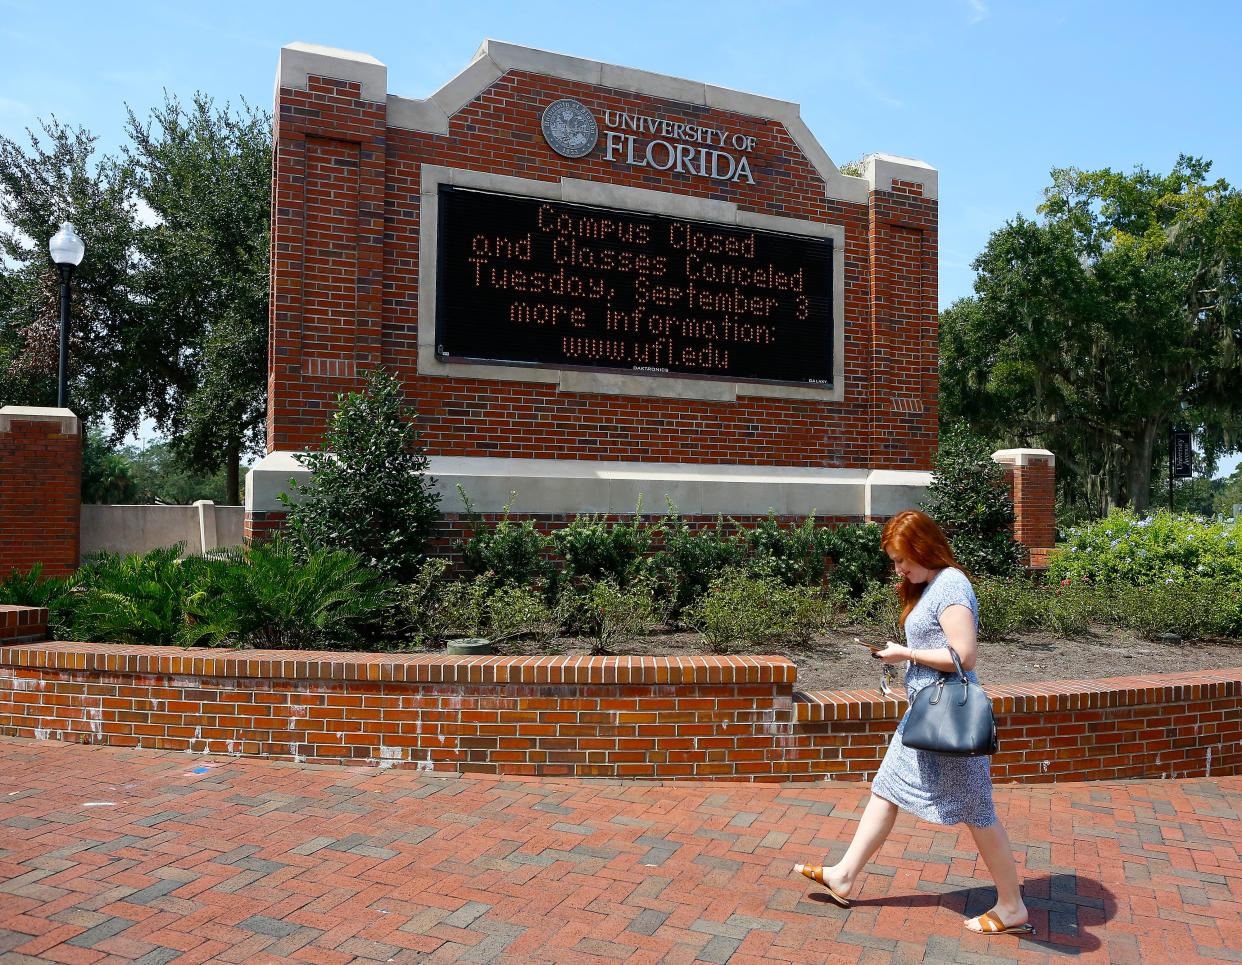 A woman walks past a University of Florida welcome sign on the UF campus in Gainesville.